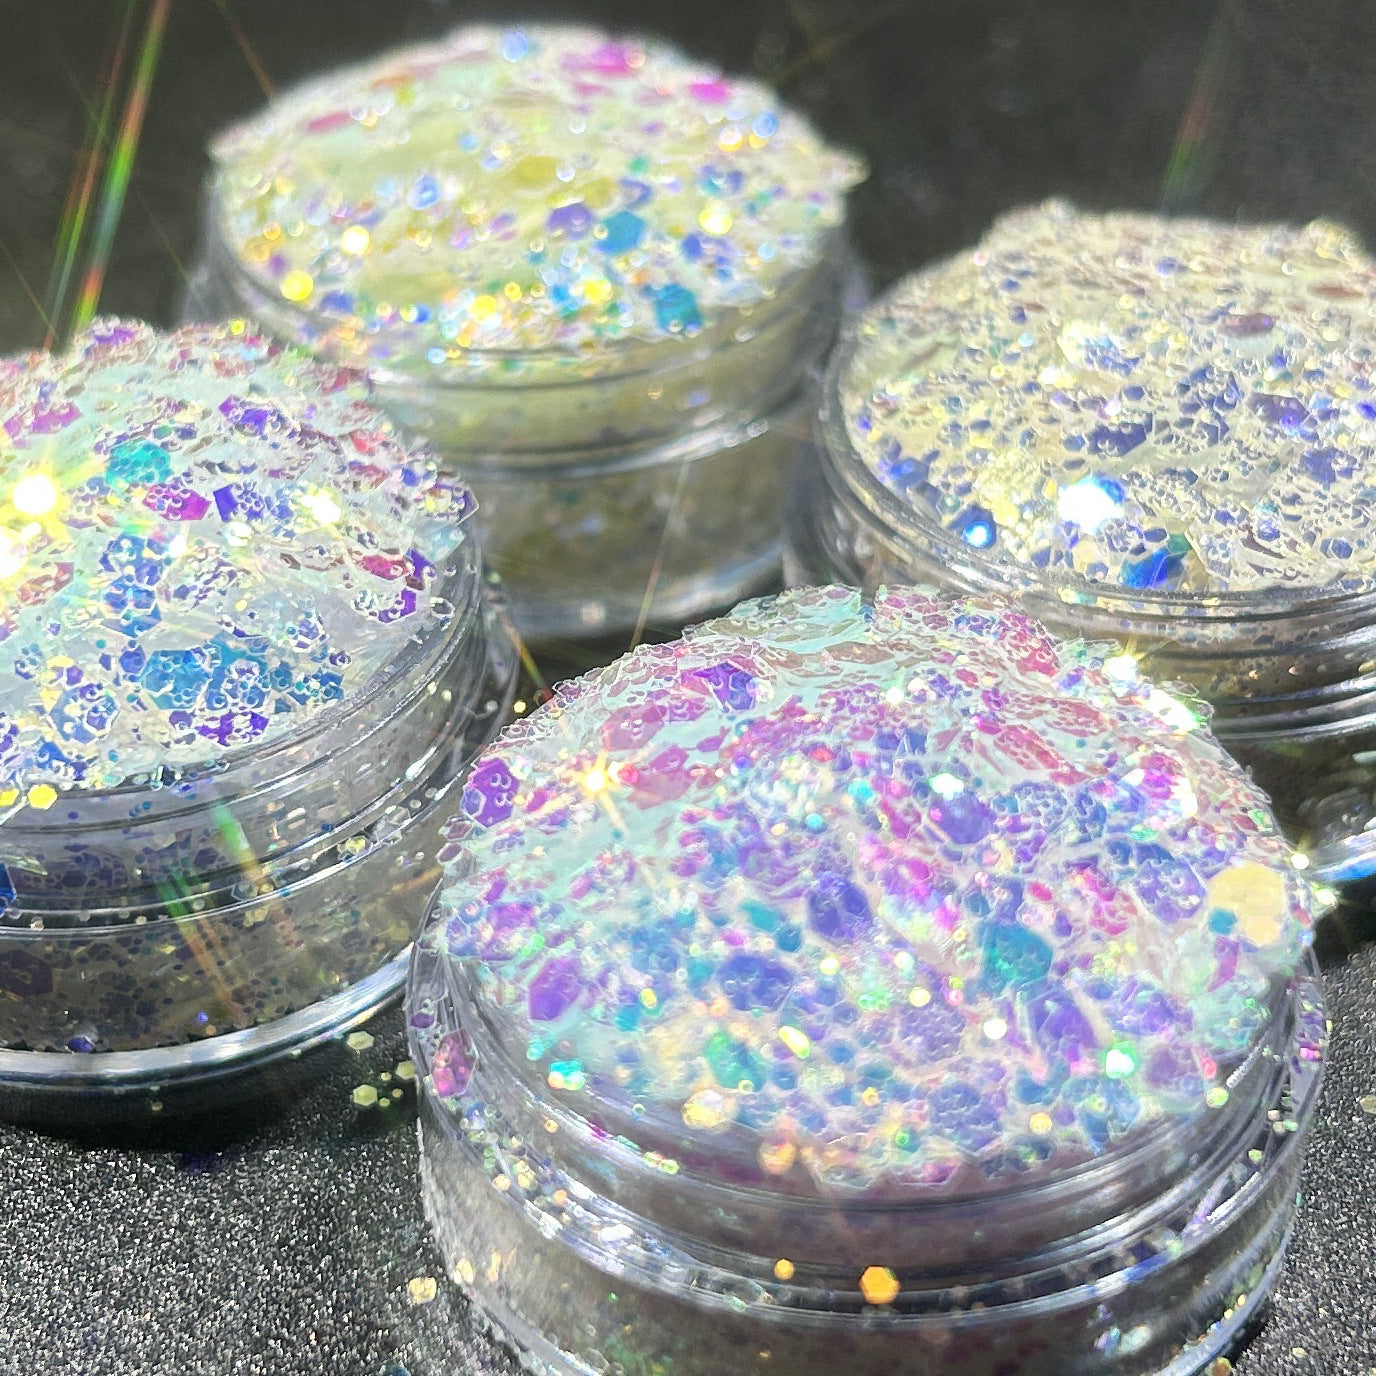 Super Sparkly Mirage Chunky and Fine Glitter Mix 10g Bag